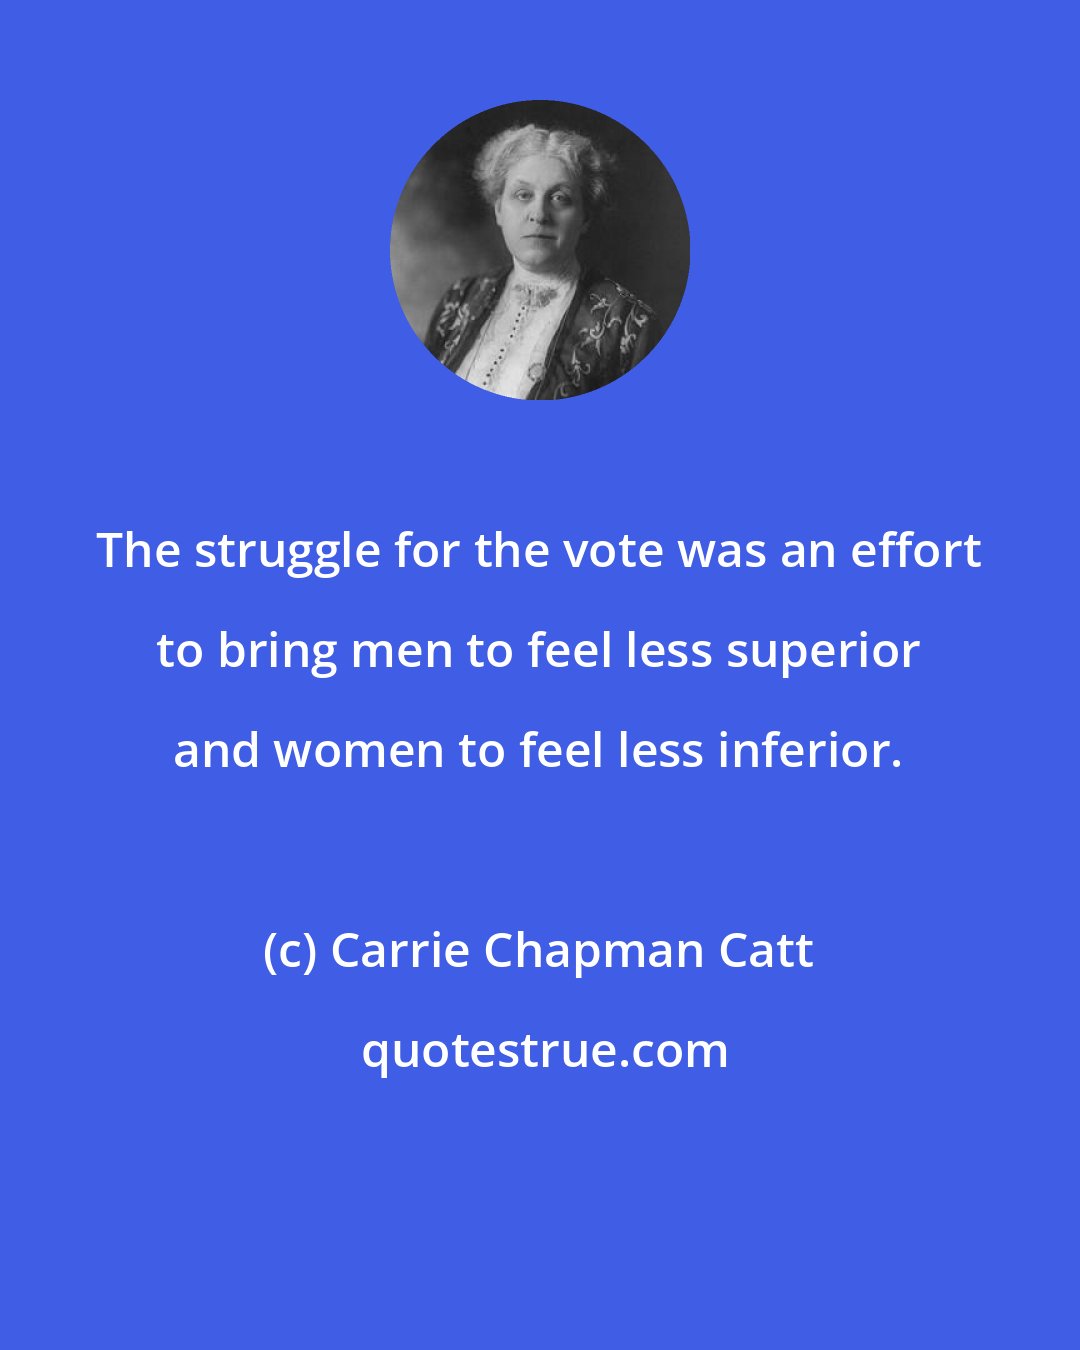 Carrie Chapman Catt: The struggle for the vote was an effort to bring men to feel less superior and women to feel less inferior.